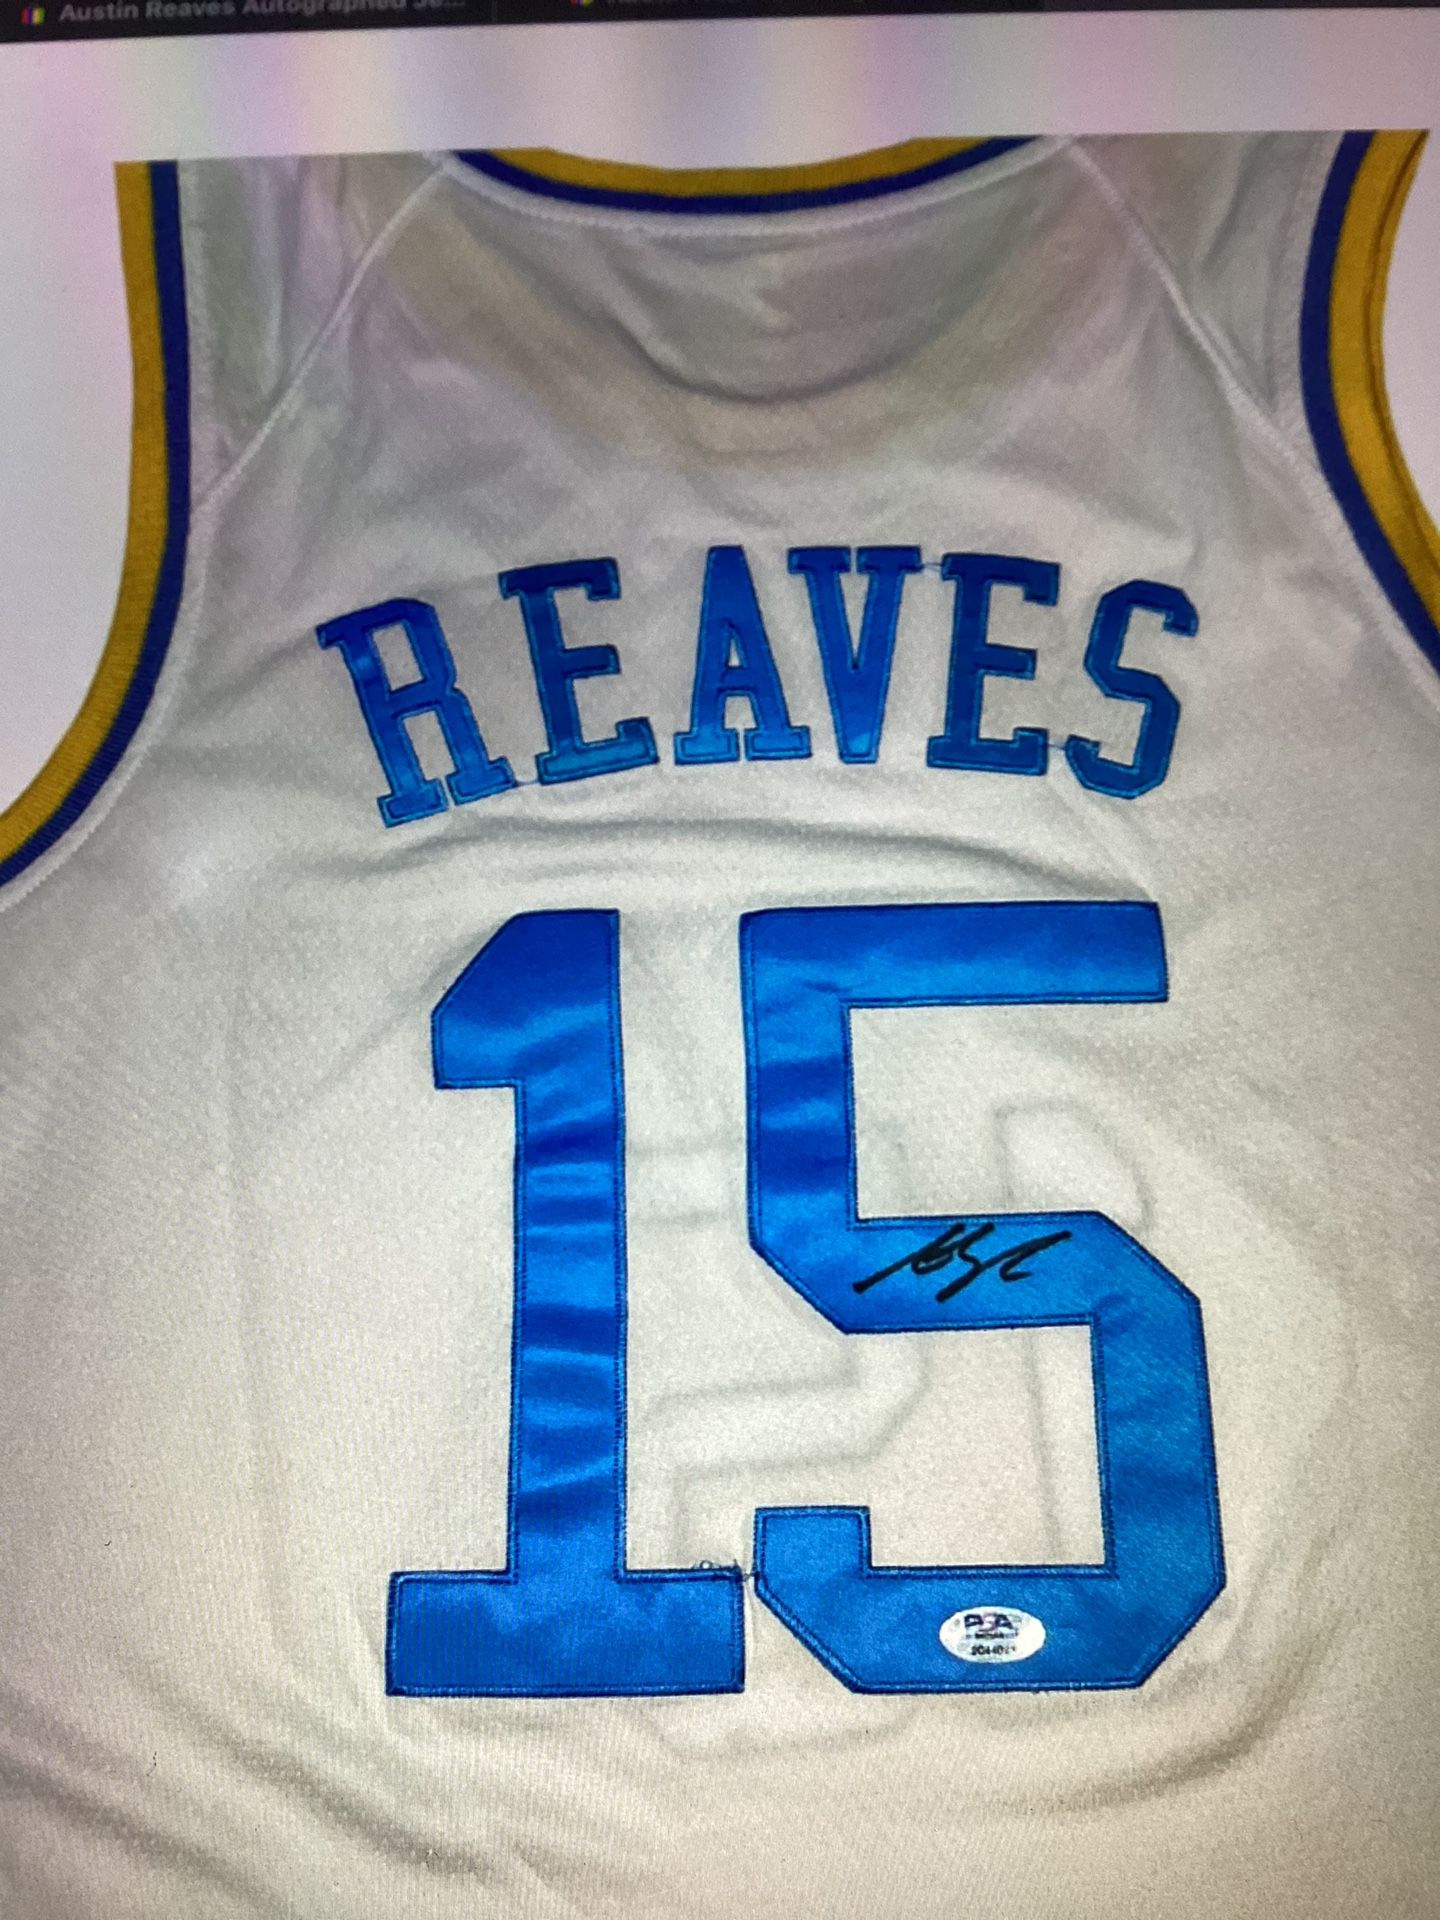 austin reaves jersey for sale